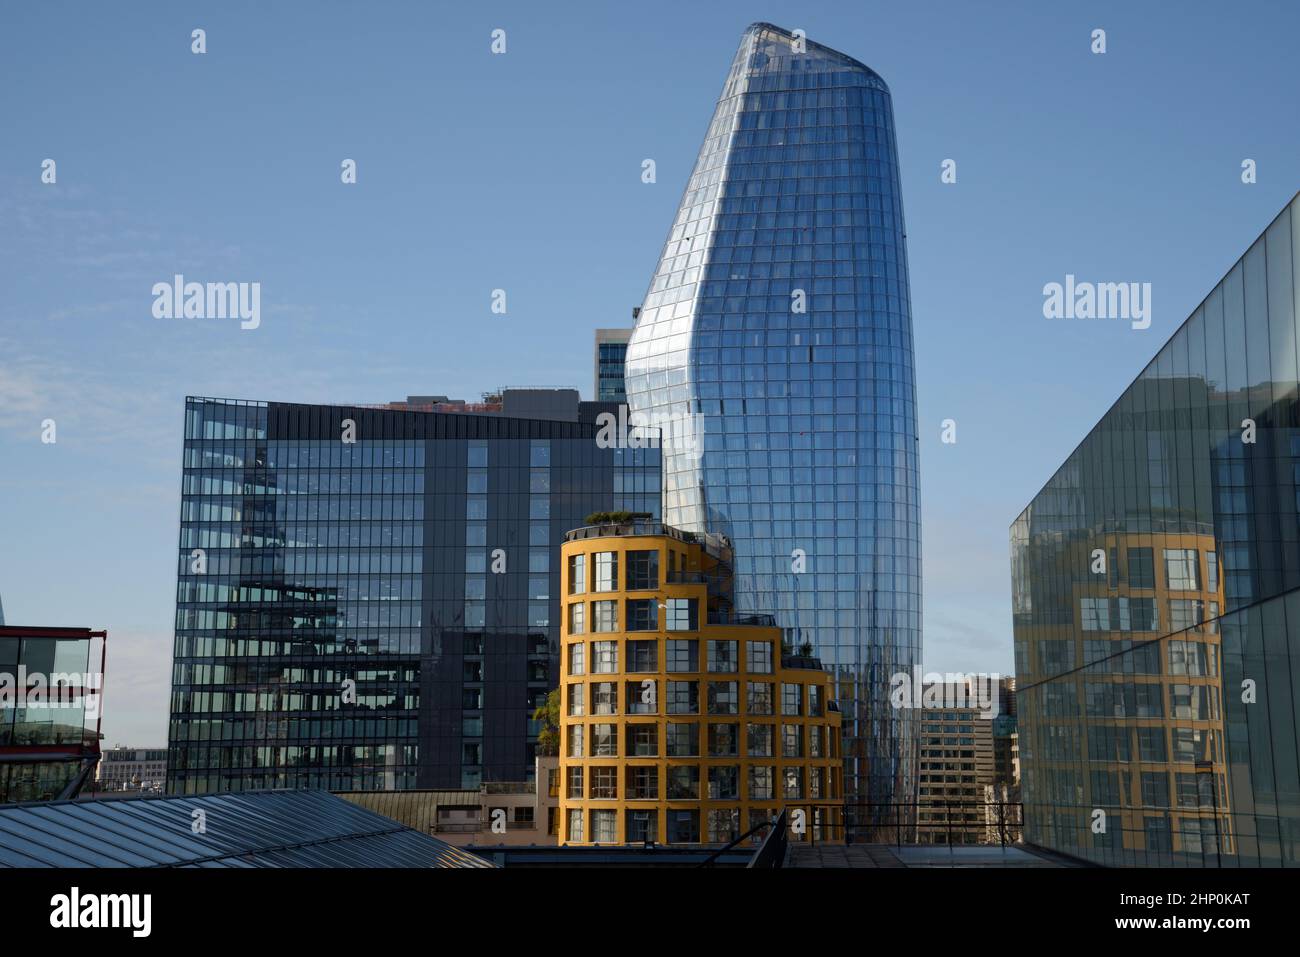 Modern buildings in London, England. Flats and offices. A mix of residential and business property. Stock Photo